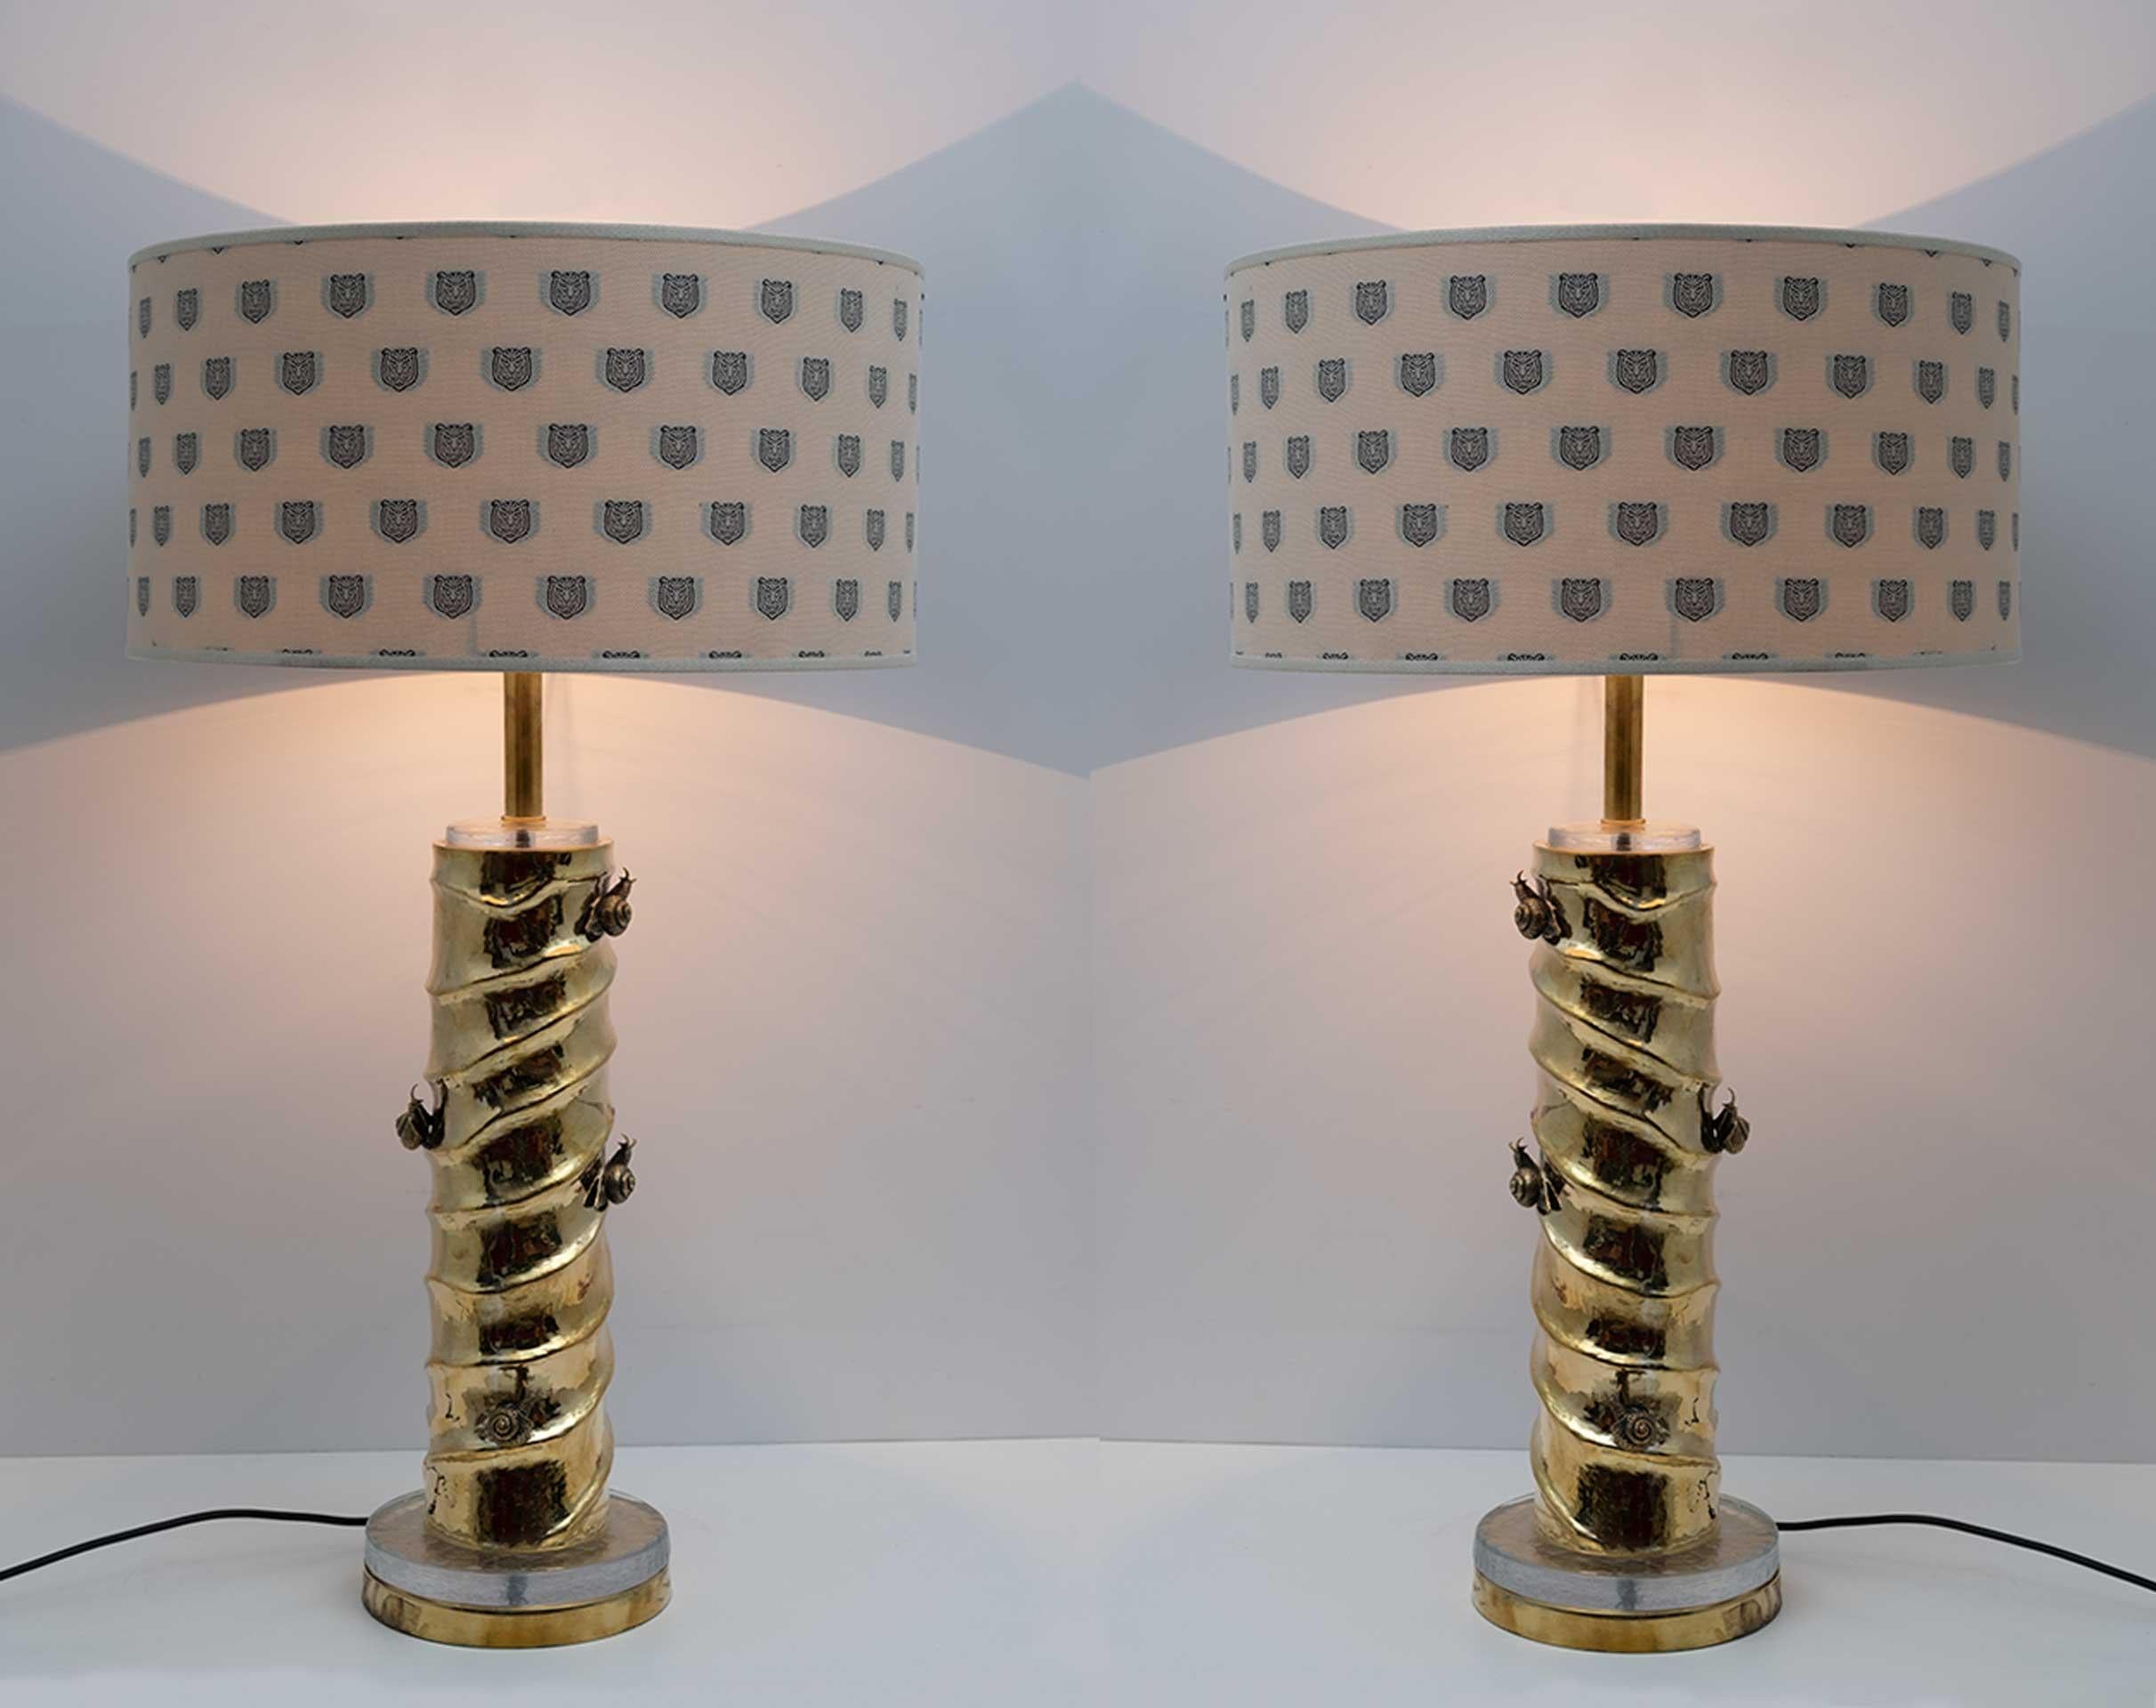 Pair of bamboo cane effect brass lamps and murano glass. Six cute bronze cast snails run around the brass base. The lampshade is in original fabric from the Gucci collection.